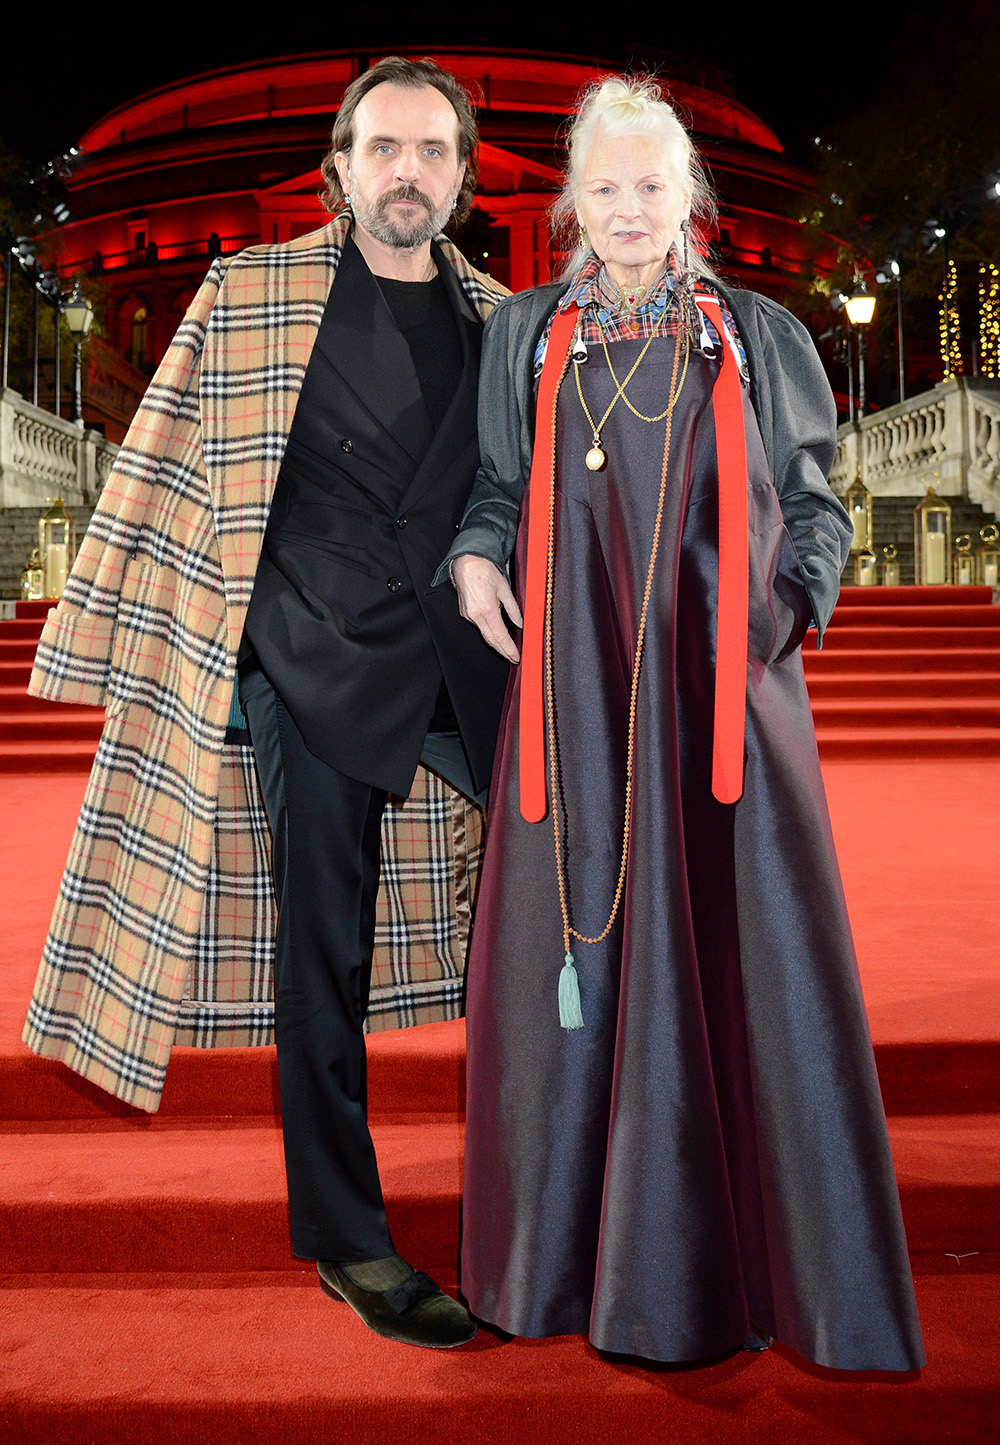 Mandatory Credit: Photo by Richard Young/REX/Shutterstock (10020228dk) Andreas Kronthaler and Vivienne Westwood The British Fashion Awards, VIP Arrivals, Royal Albert Hall, London, UK - 10 Dec 2018